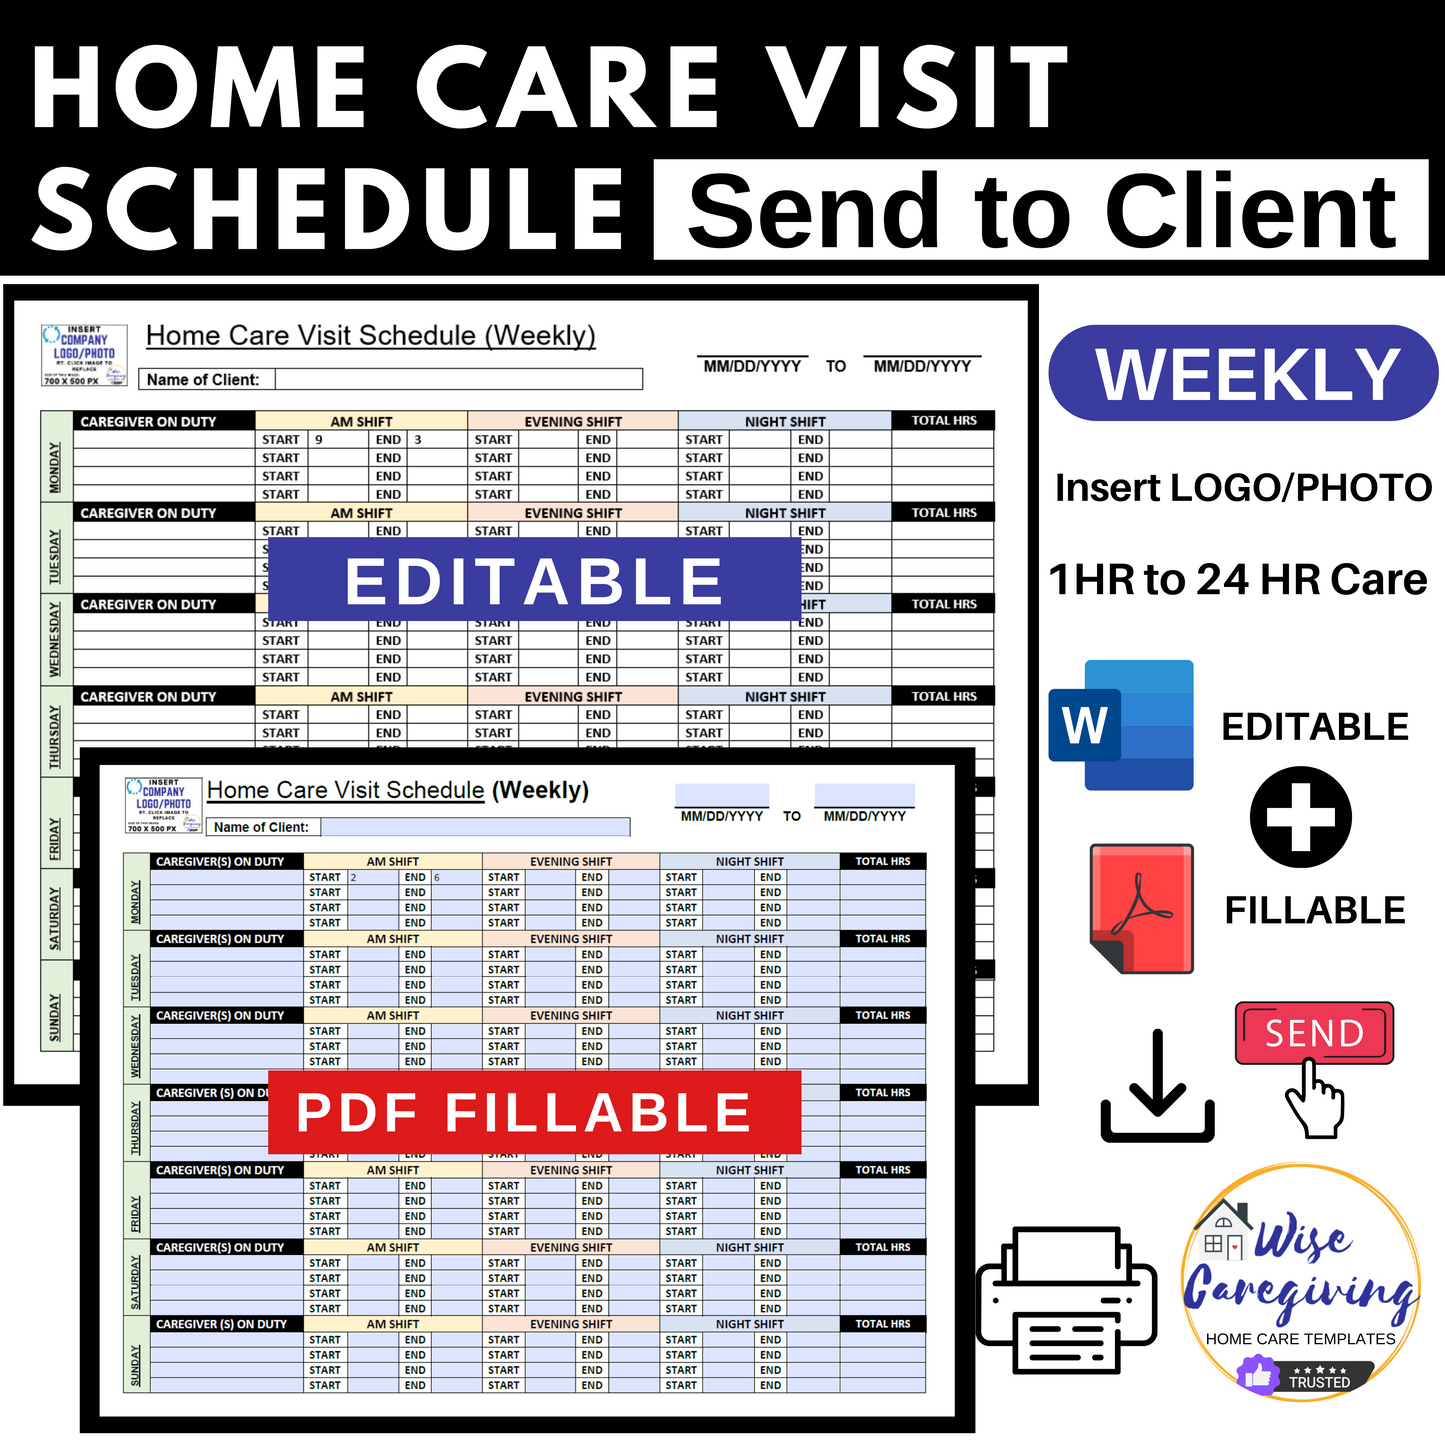 Home Care Visit Schedule Template for Client